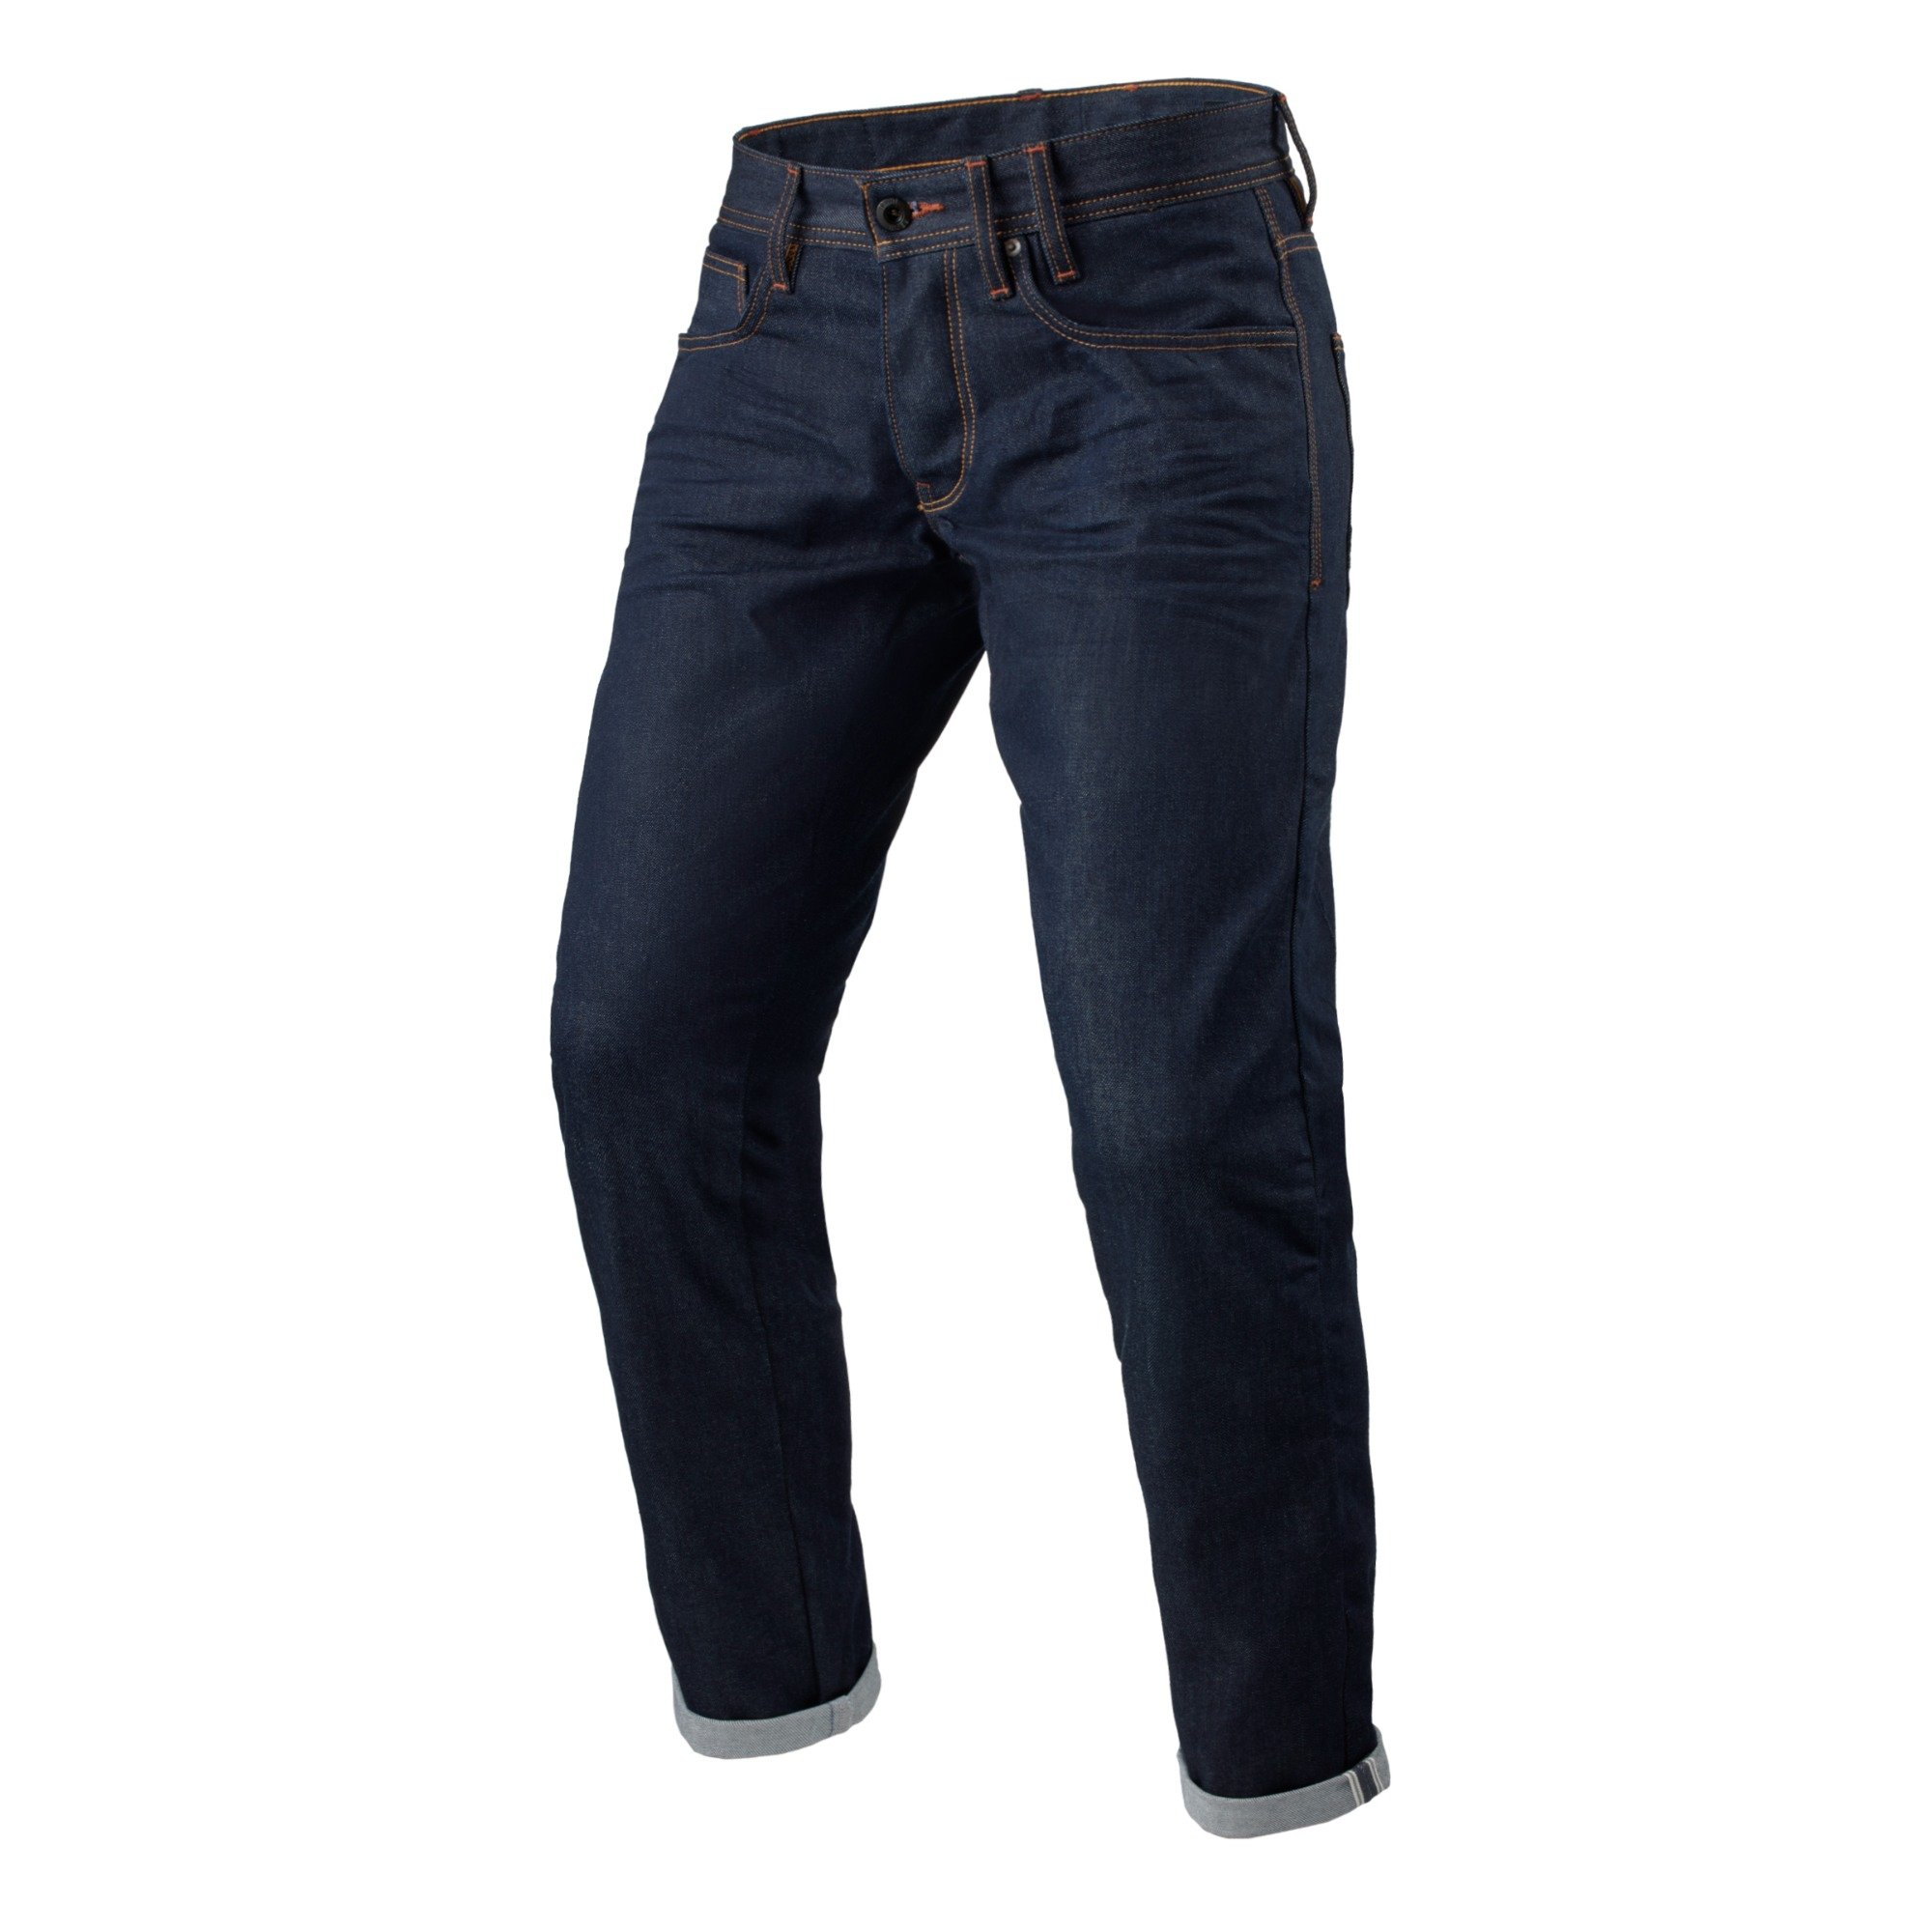 Image of REV'IT! Jeans Lewis Selvedge TF Dark Blue L32 Motorcycle Pants Size L32/W33 ID 8700001358064